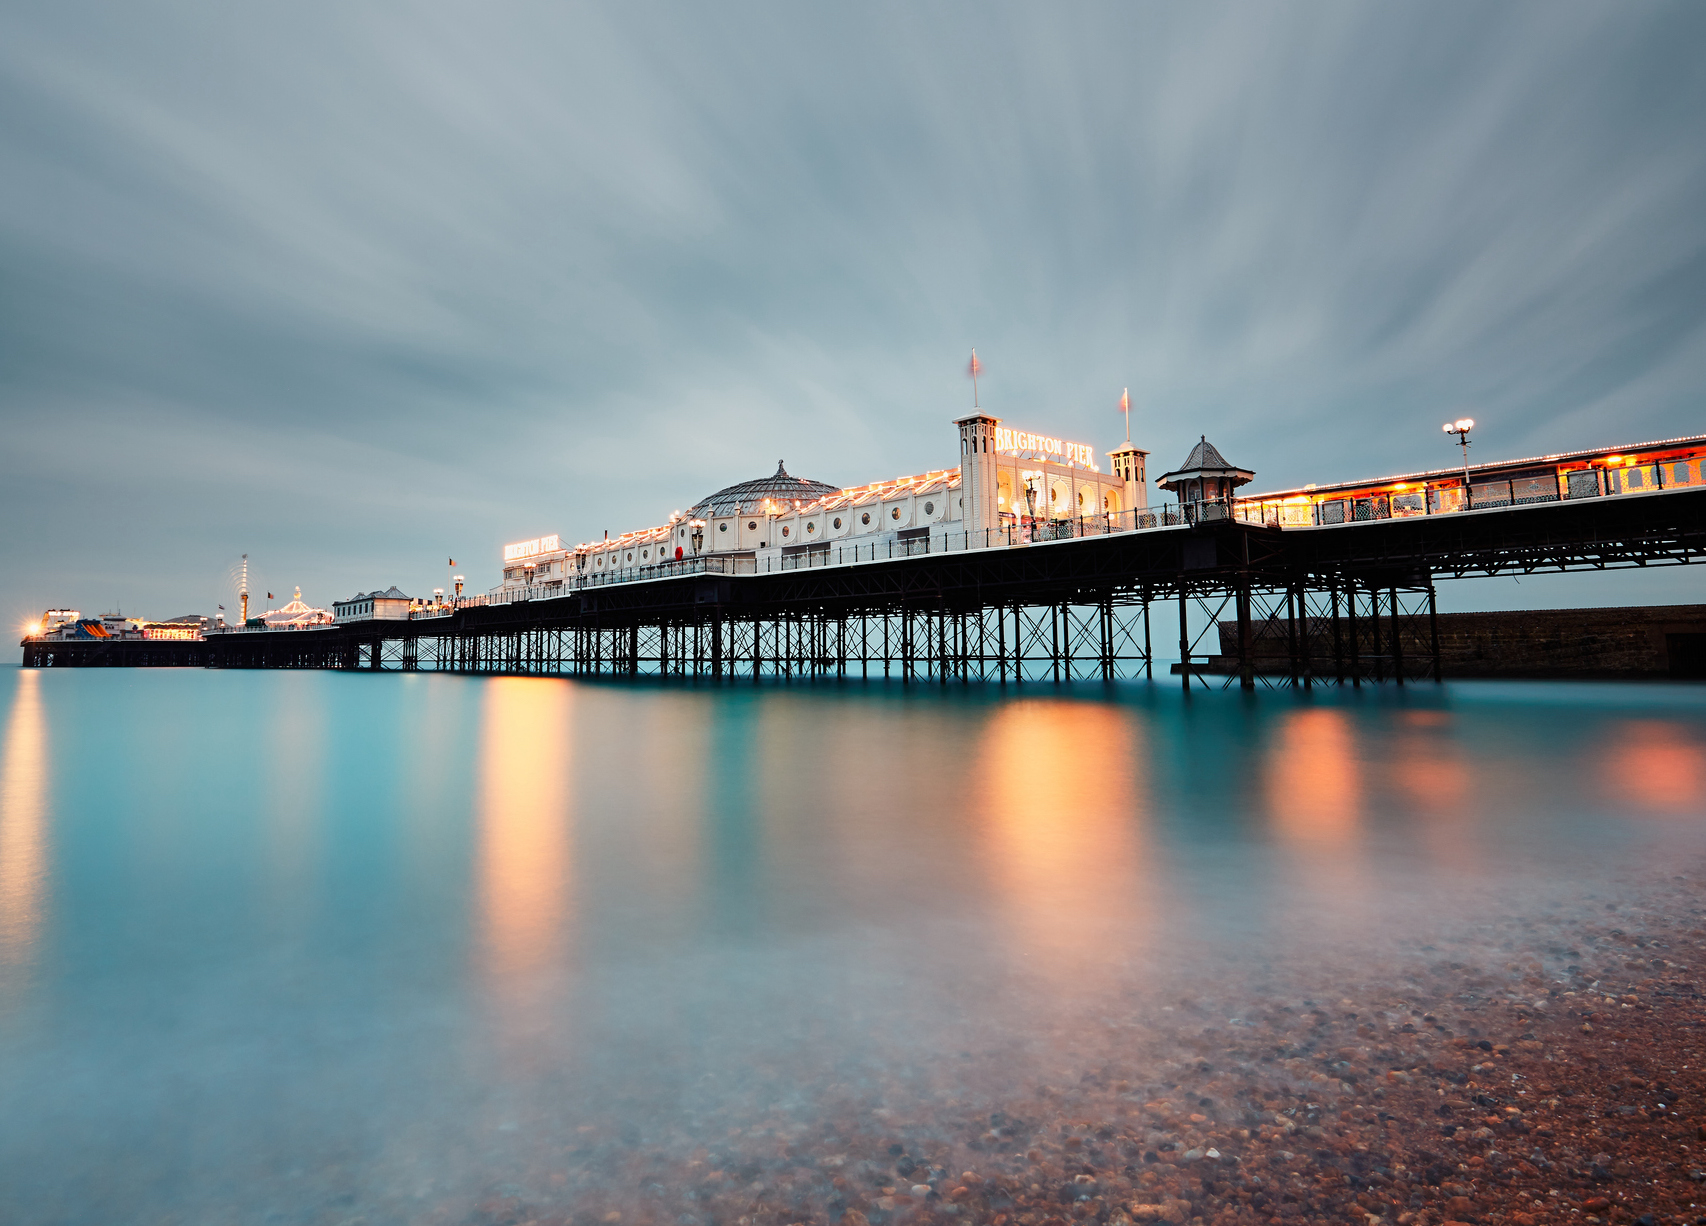 Brighton Pier lit up at dusk, with lights reflected in the body of still water below the pier